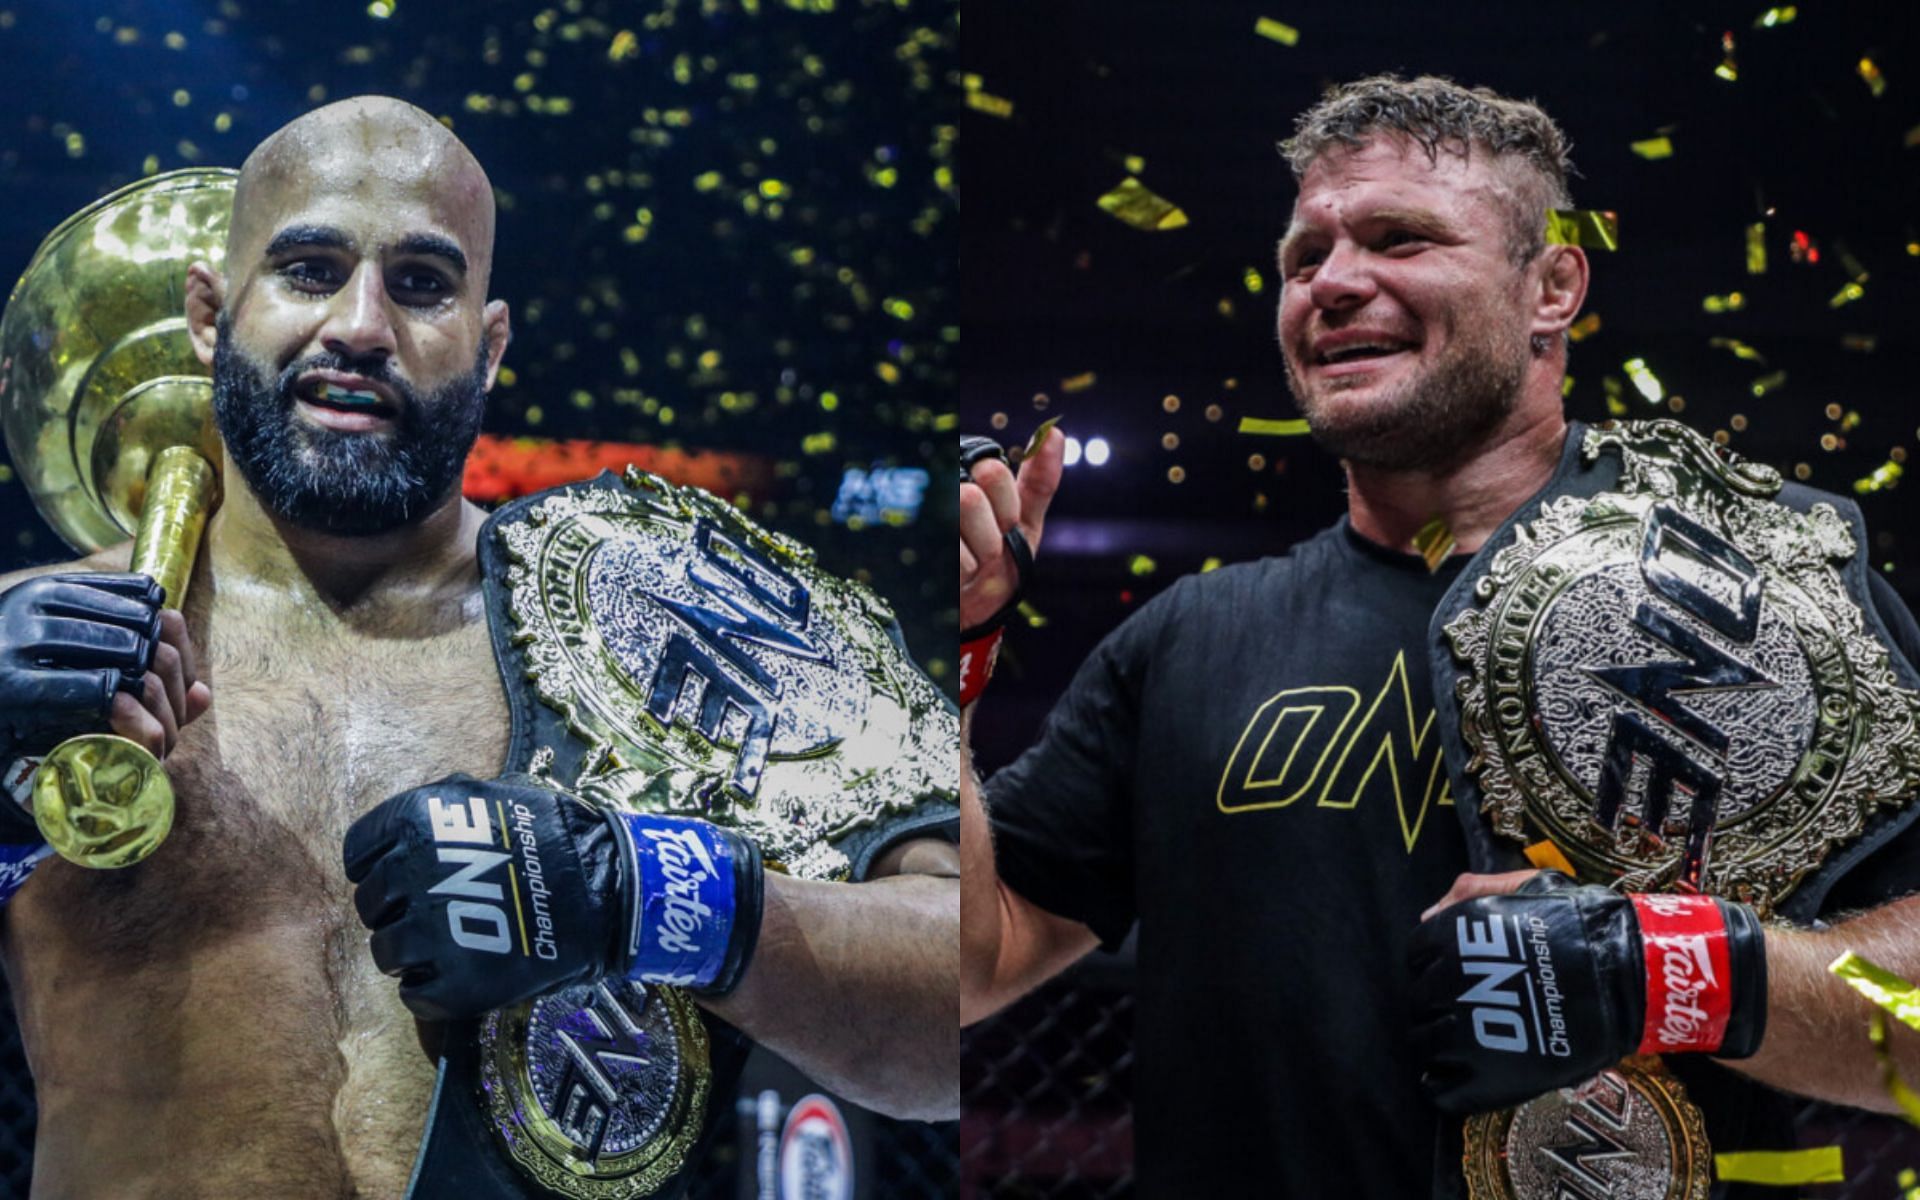 Anatoly Malykhin (right) called out Arjan Bhullar (left) in hopes of setting up a unification fight for the undisputed ONE heavyweight world title. [Photos ONE Championship]